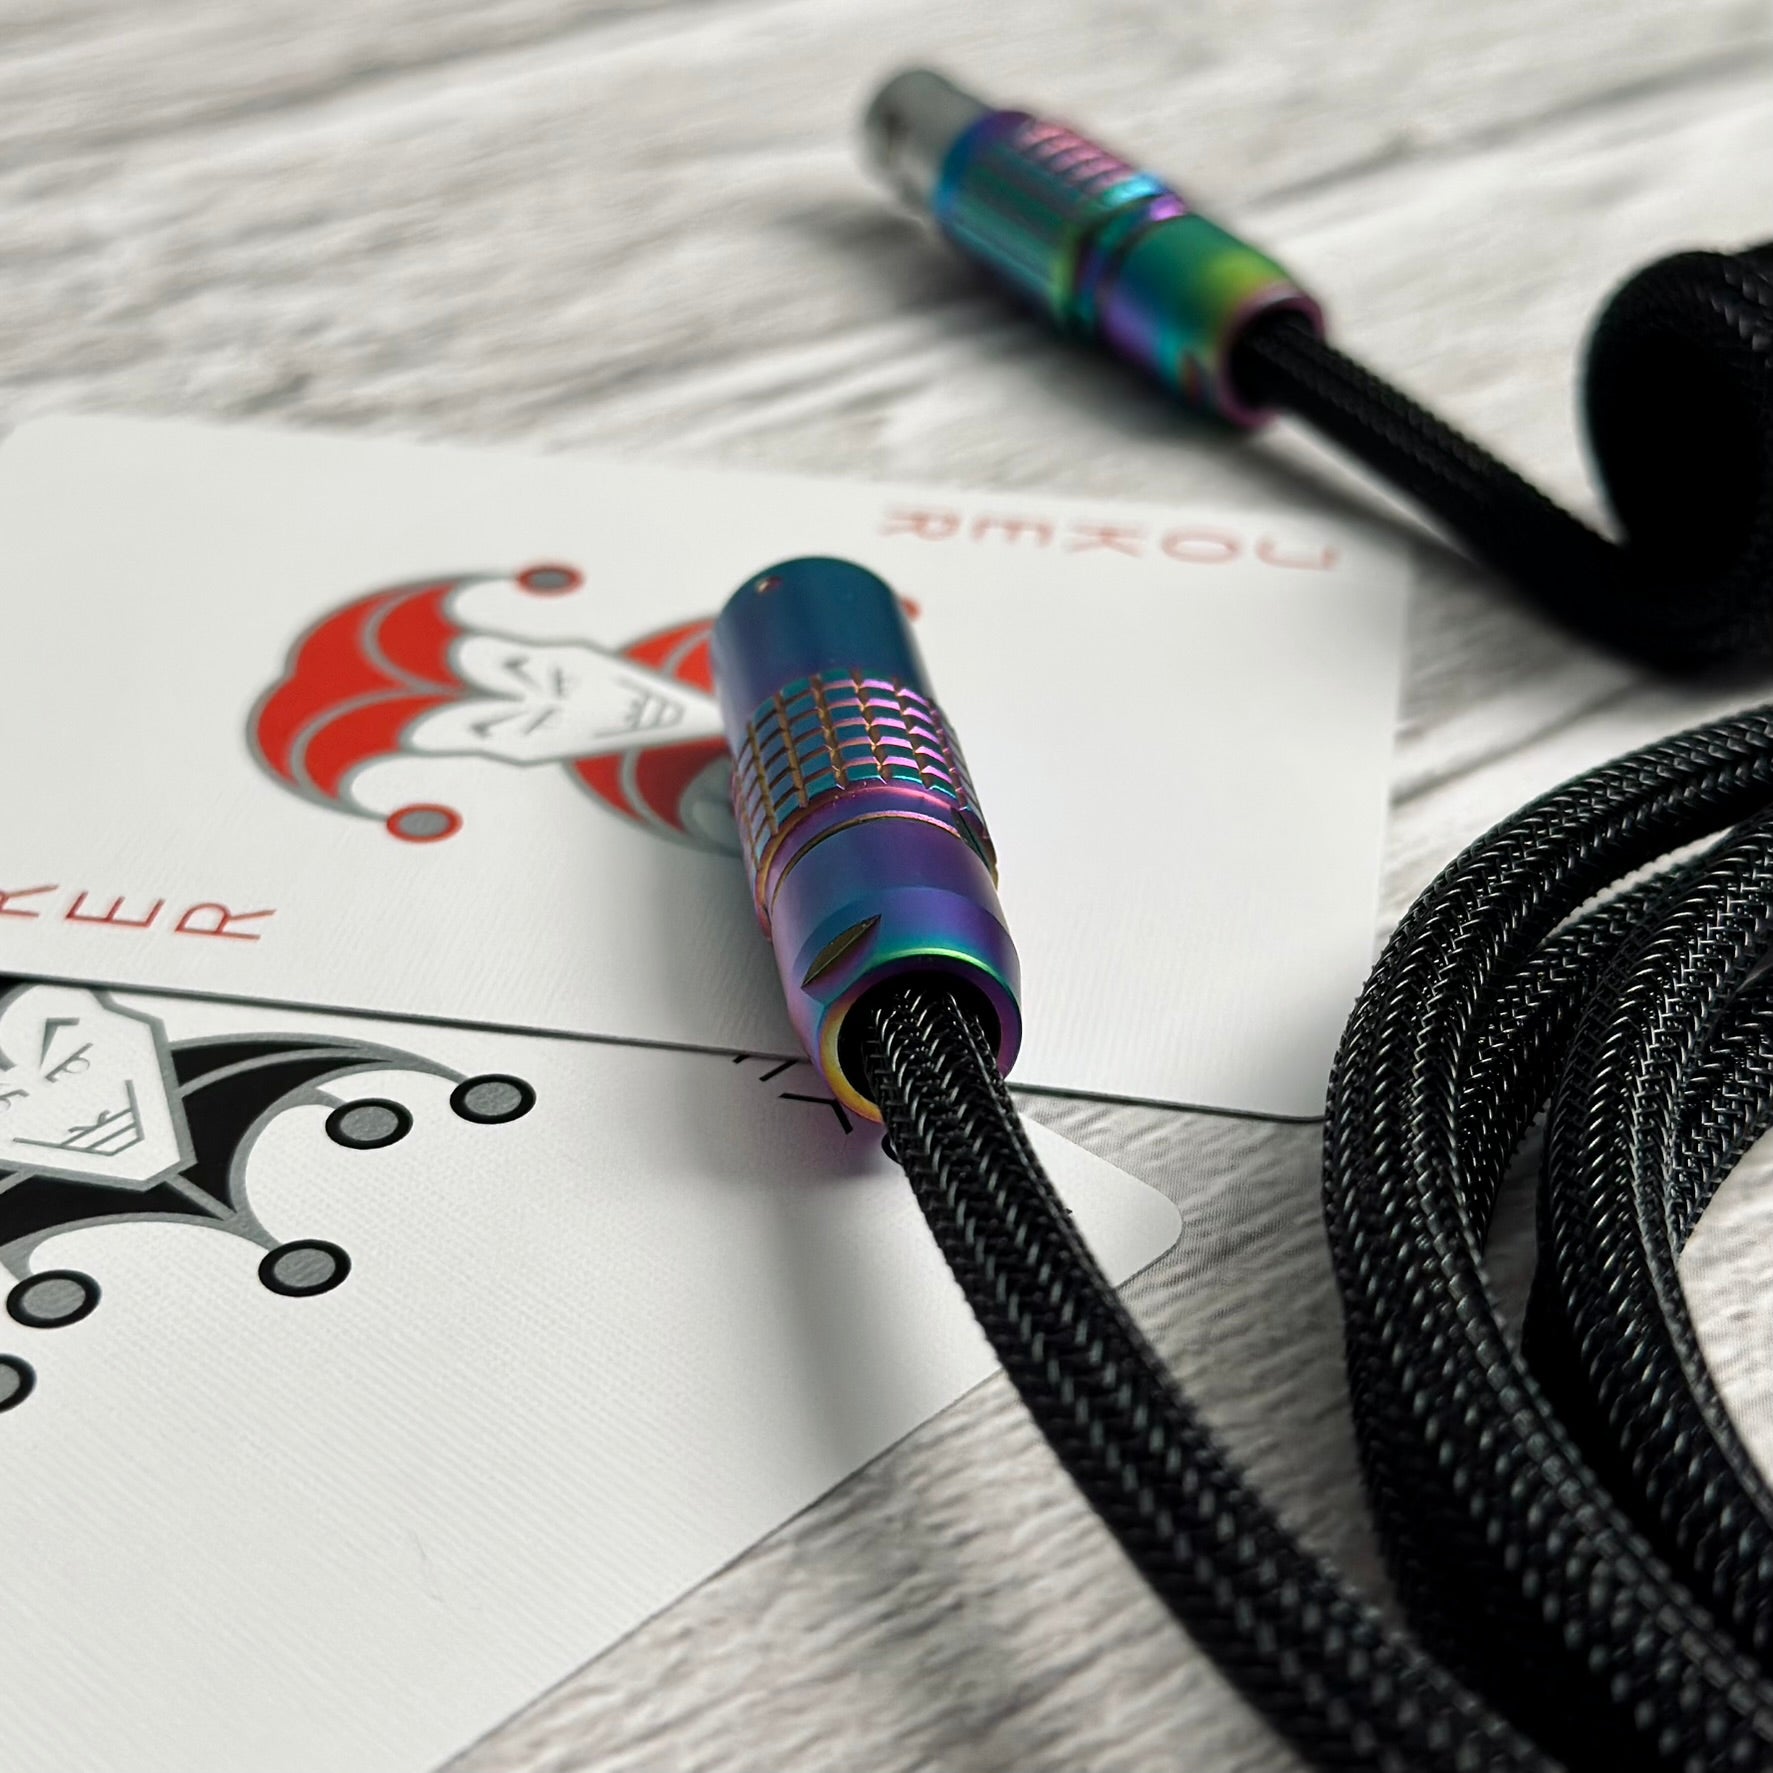 Closeup of two joker cards (one red & one black), Teleios sleeved keyboard cable in black with black TechFlex, and a rainbow colored FEMO push/pull connector